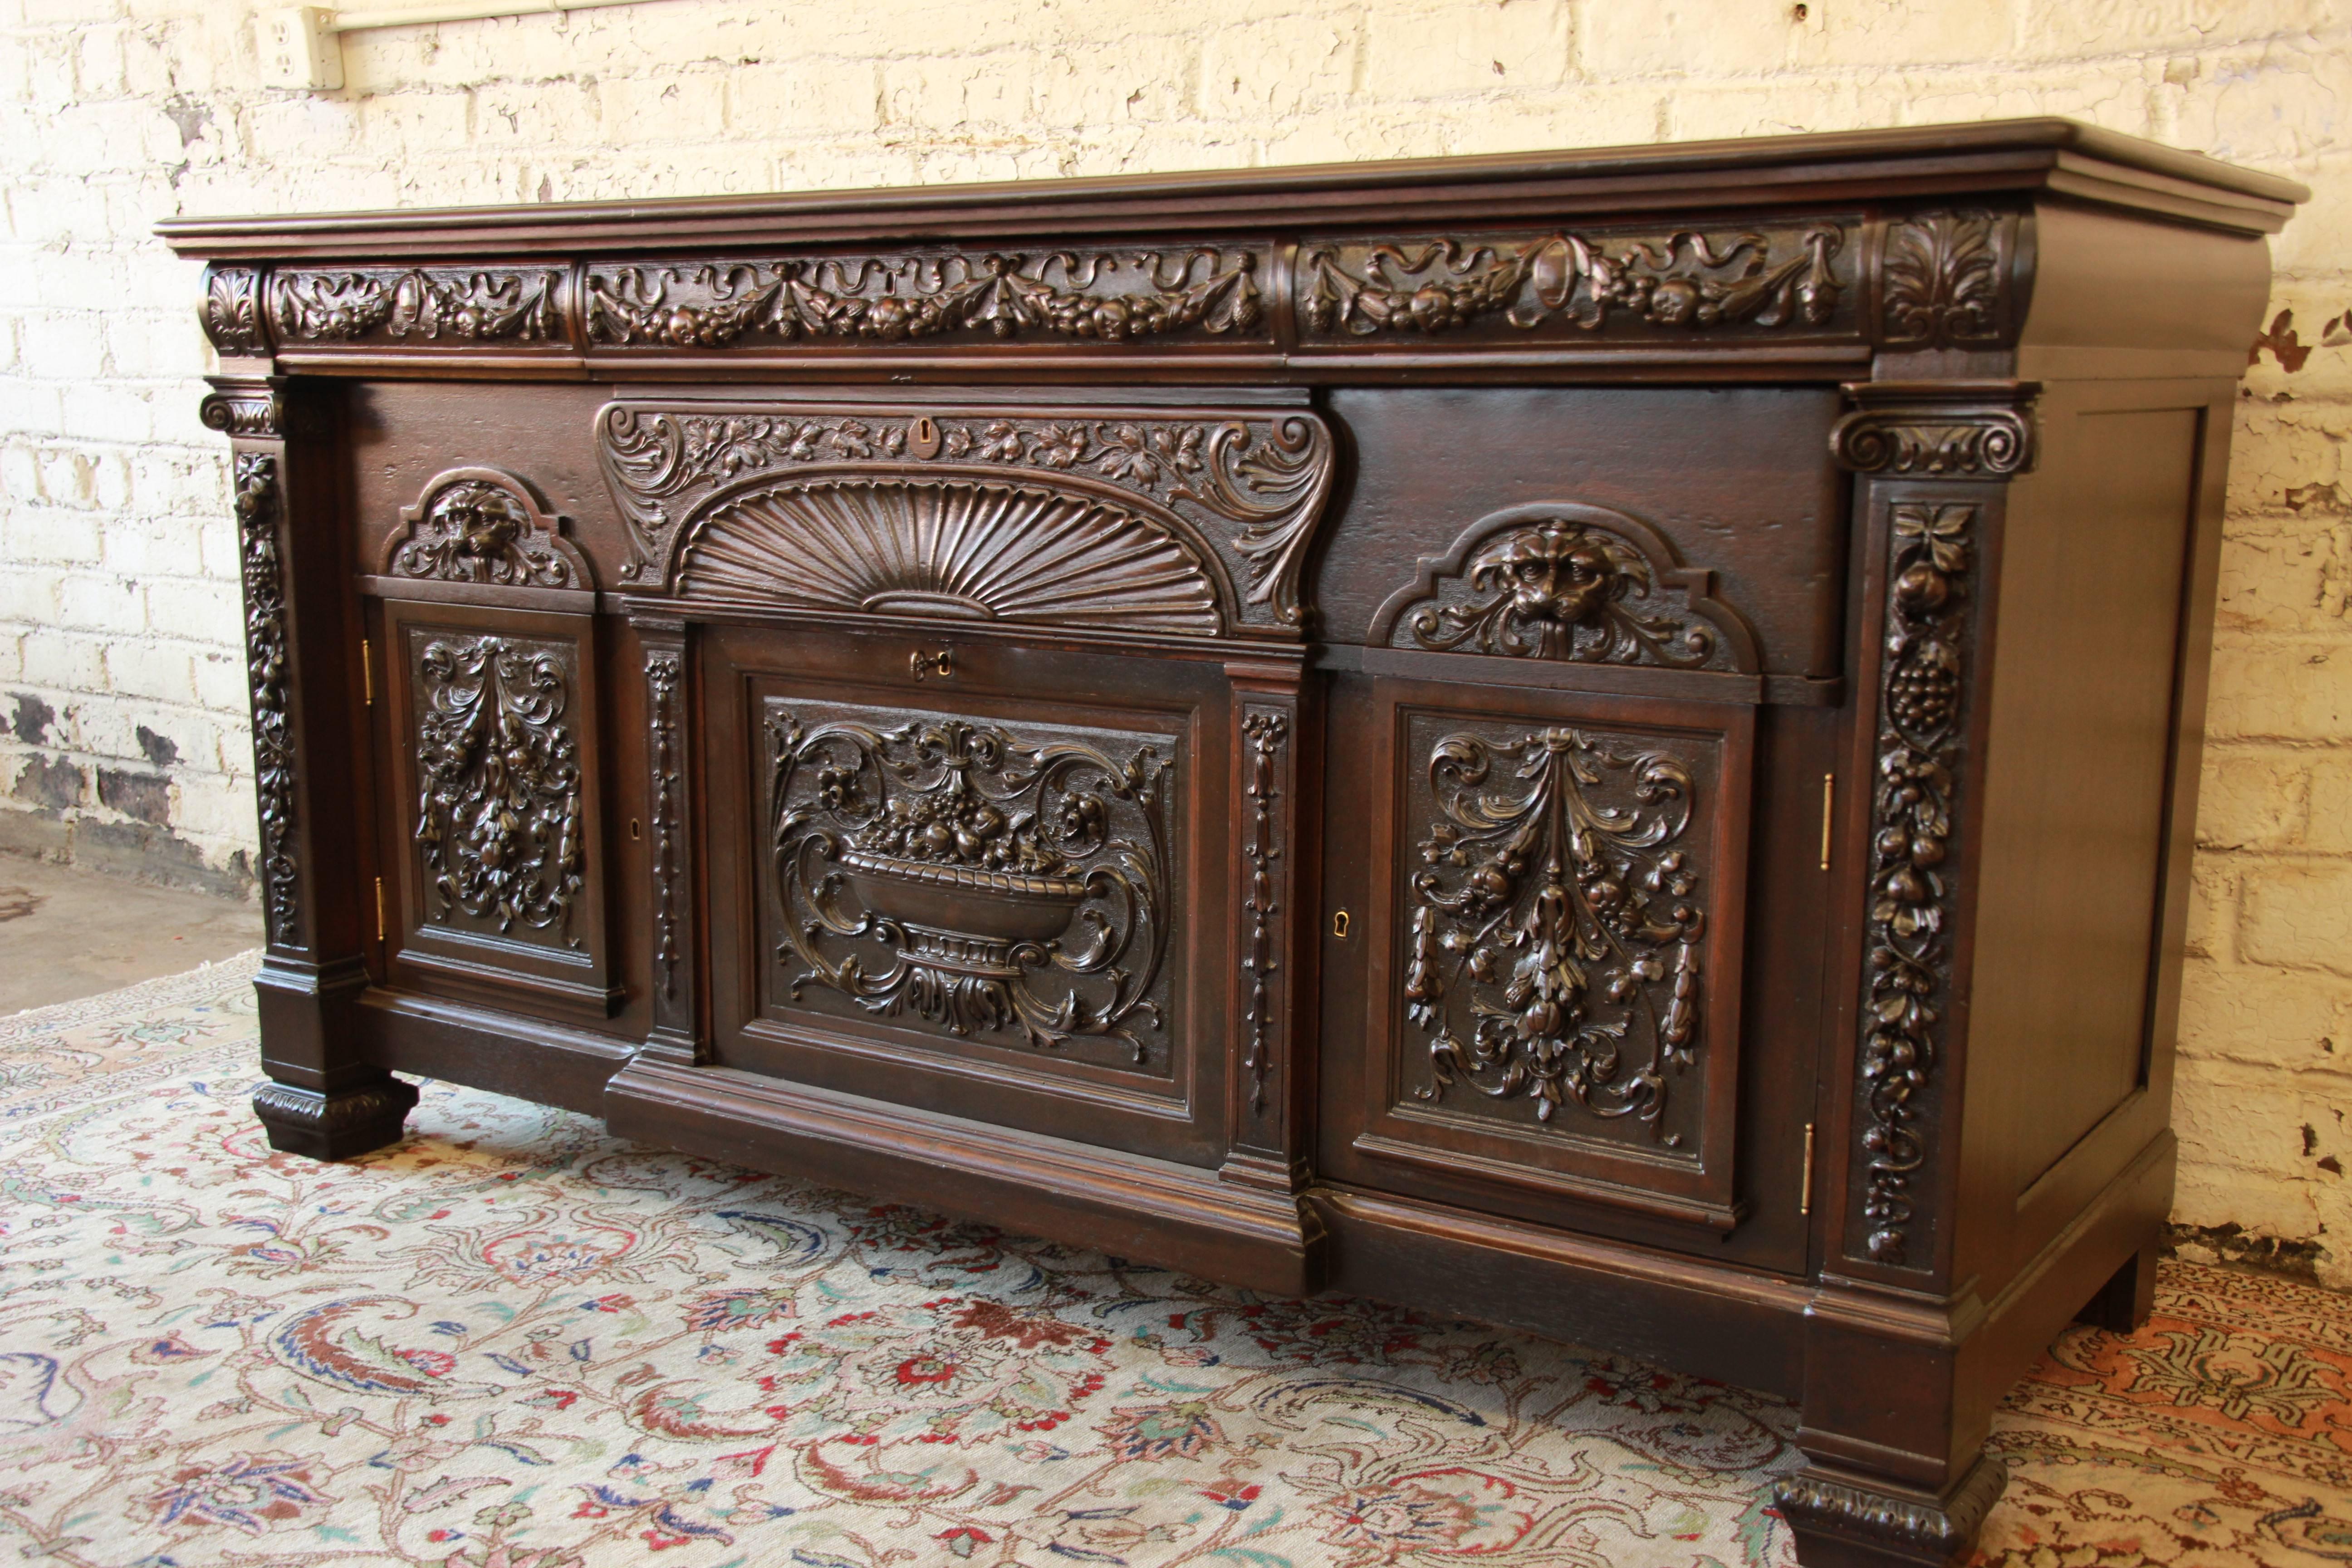 A beautiful 19th century ornately carved mahogany Victorian sideboard in the manner of R.J. Horner. The sideboard features stunning carved wood details, with a fruit basket motif. It offers ample room for storage, with three top drawers, a large